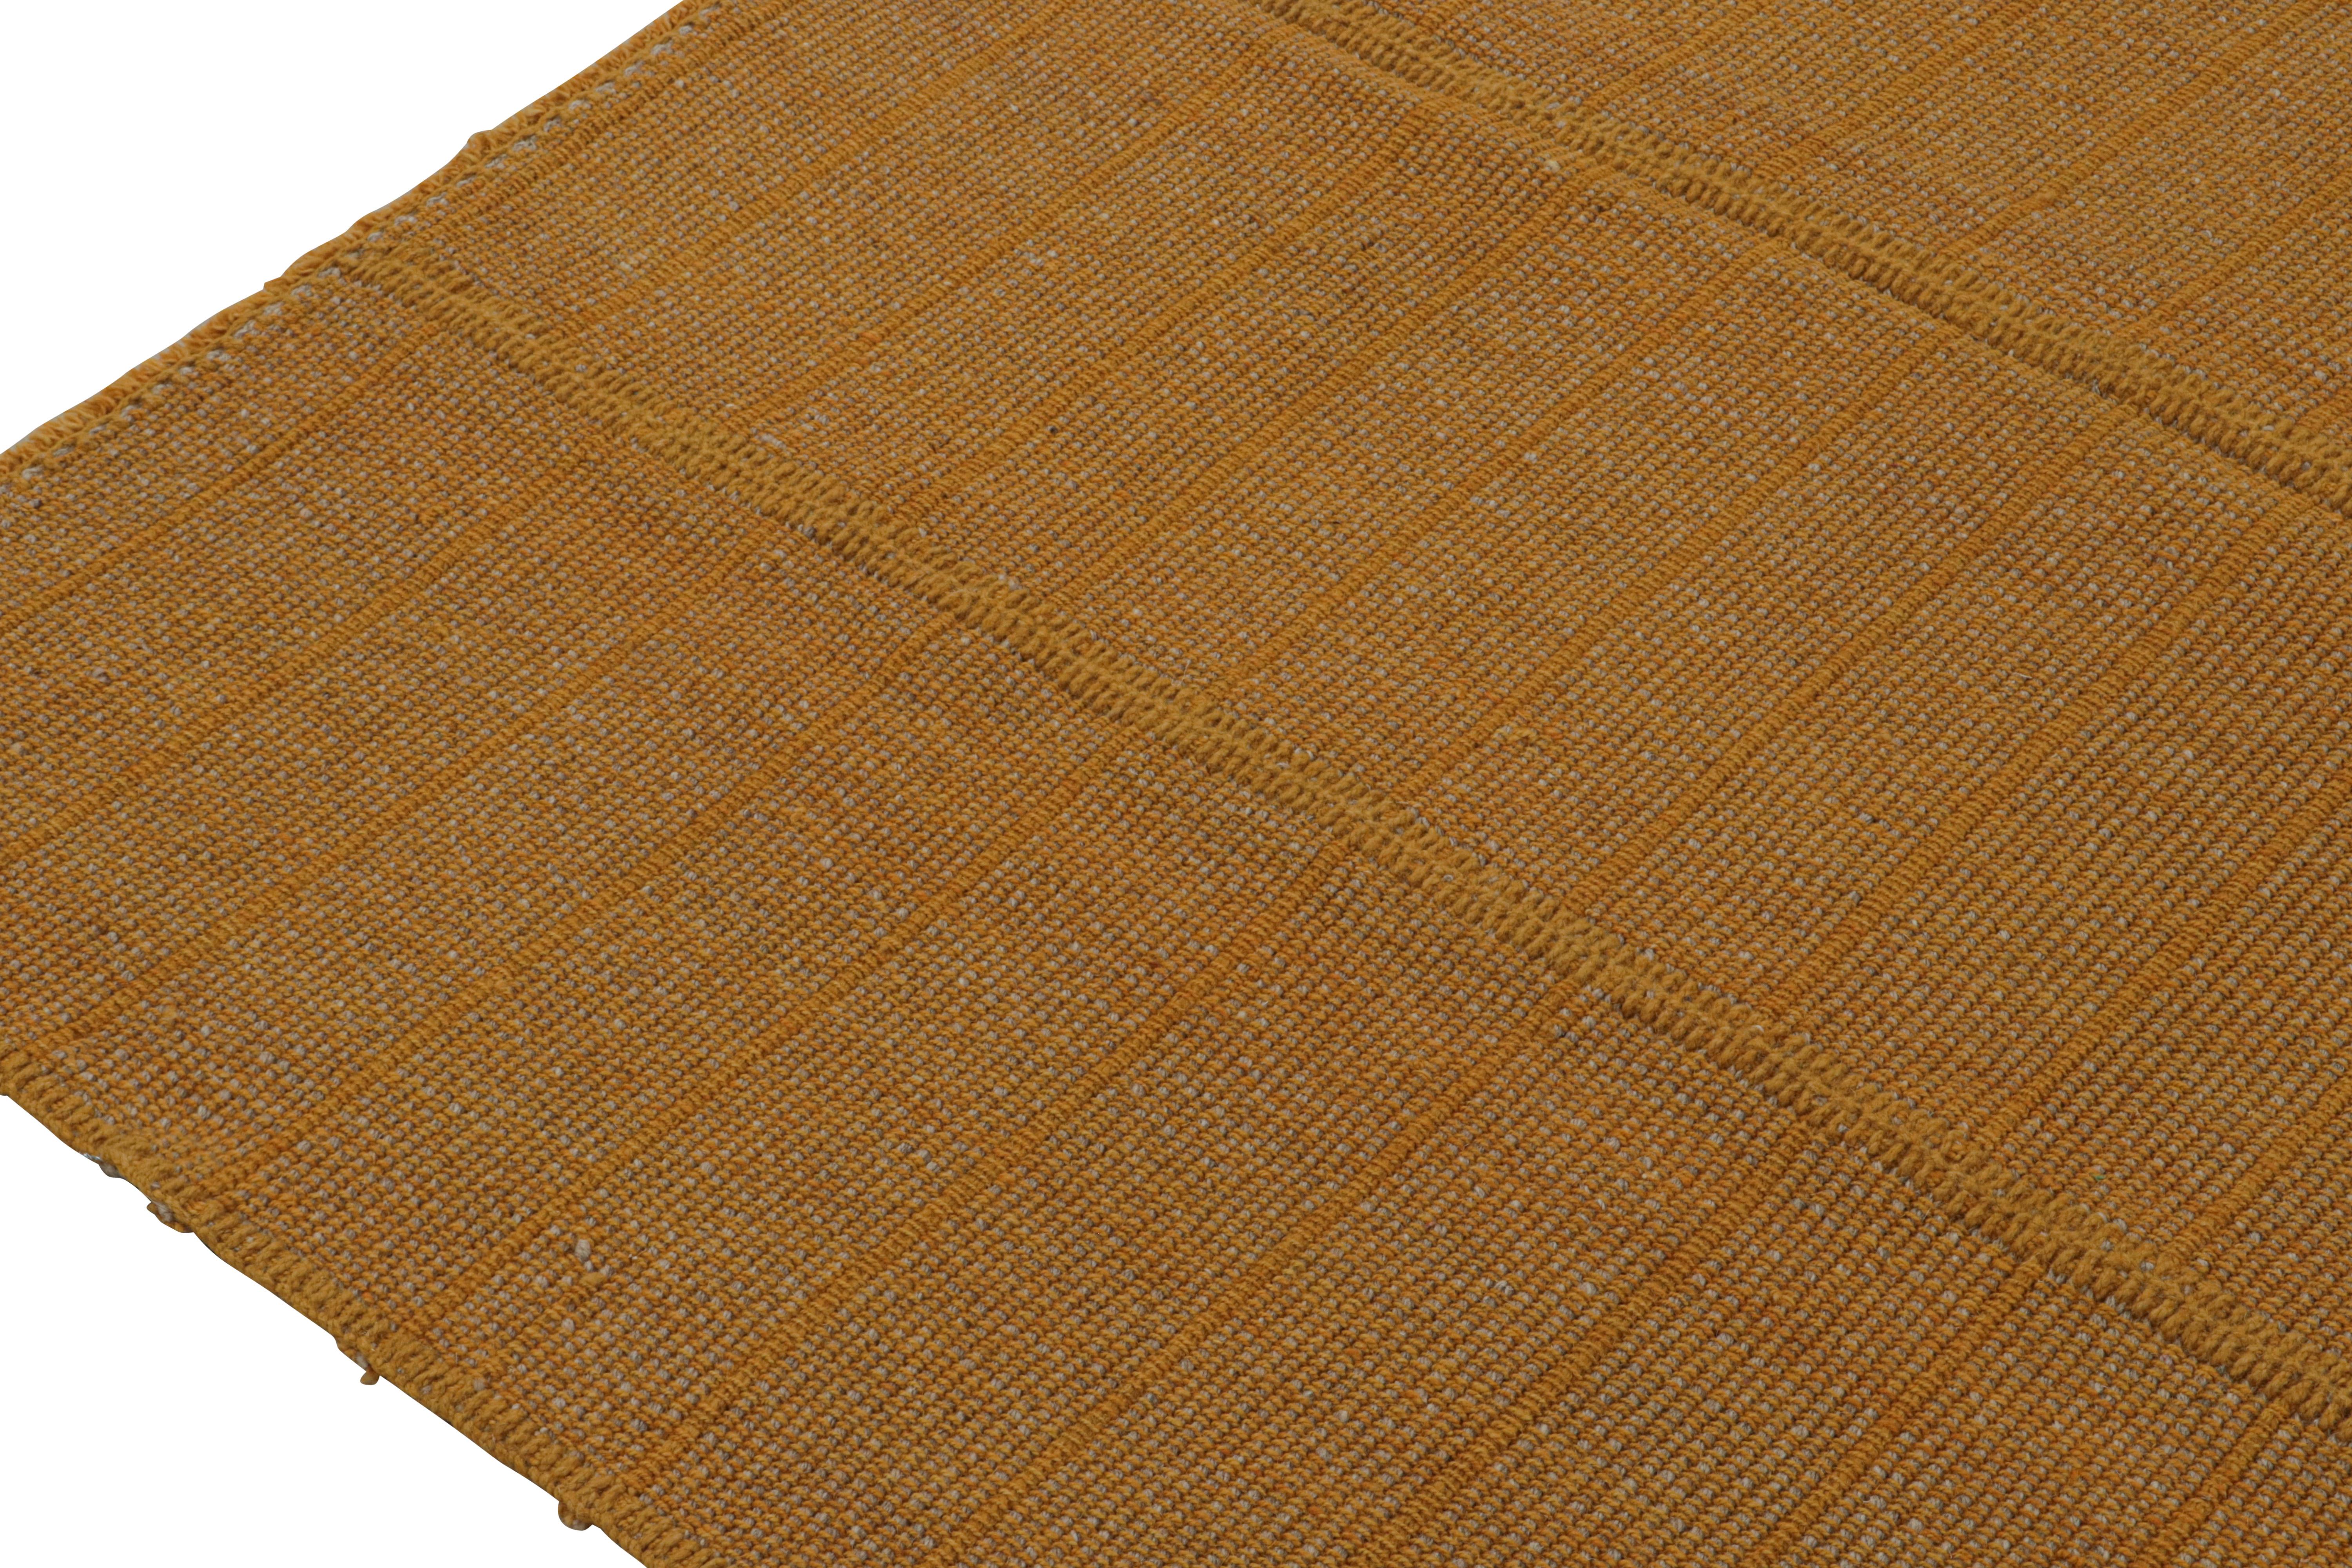 Rug & Kilim’s Modern Kilim Rug with Textural Stripes in Gold and Orange Tones In New Condition For Sale In Long Island City, NY